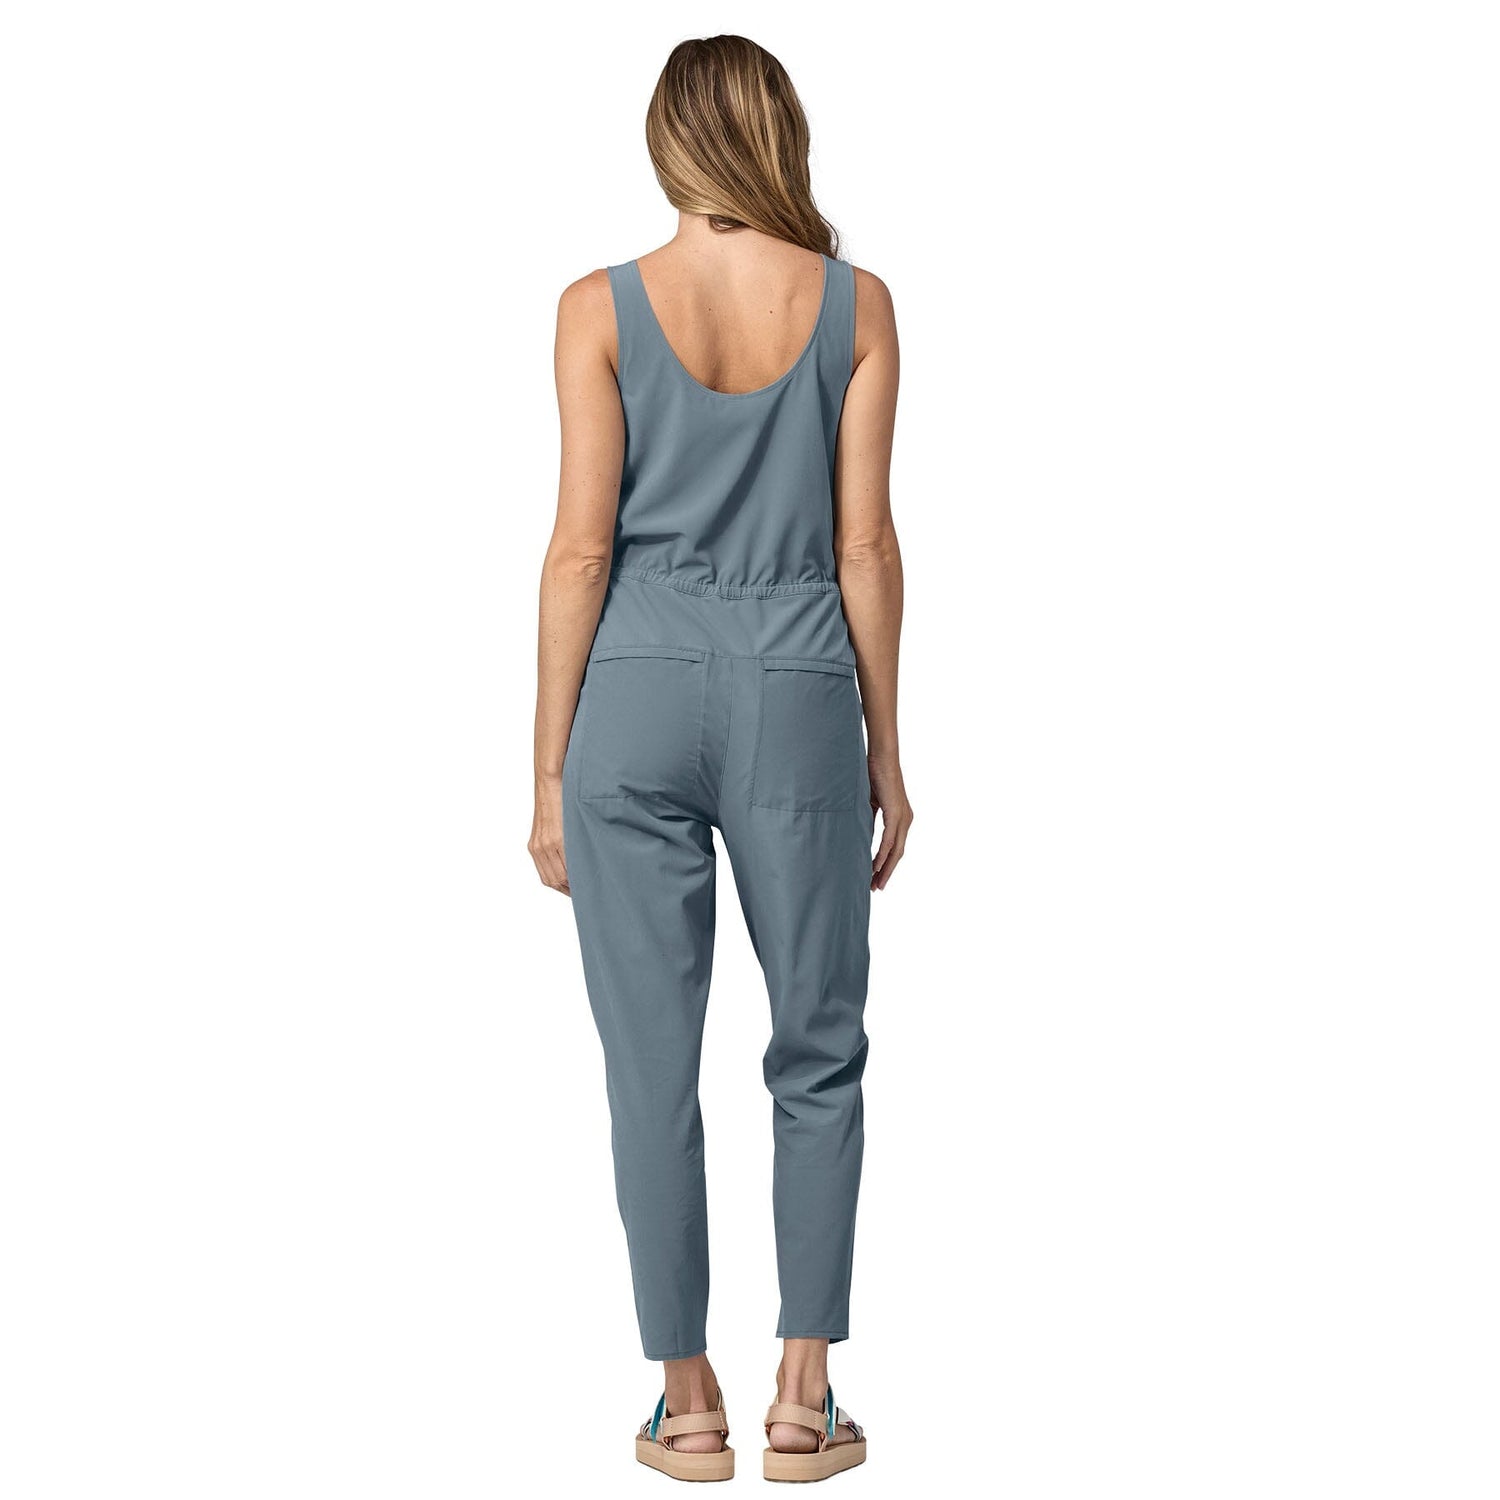 Patagonia W's Fleetwith Jumpsuit - Recycled polyester Nouveau Green Pants